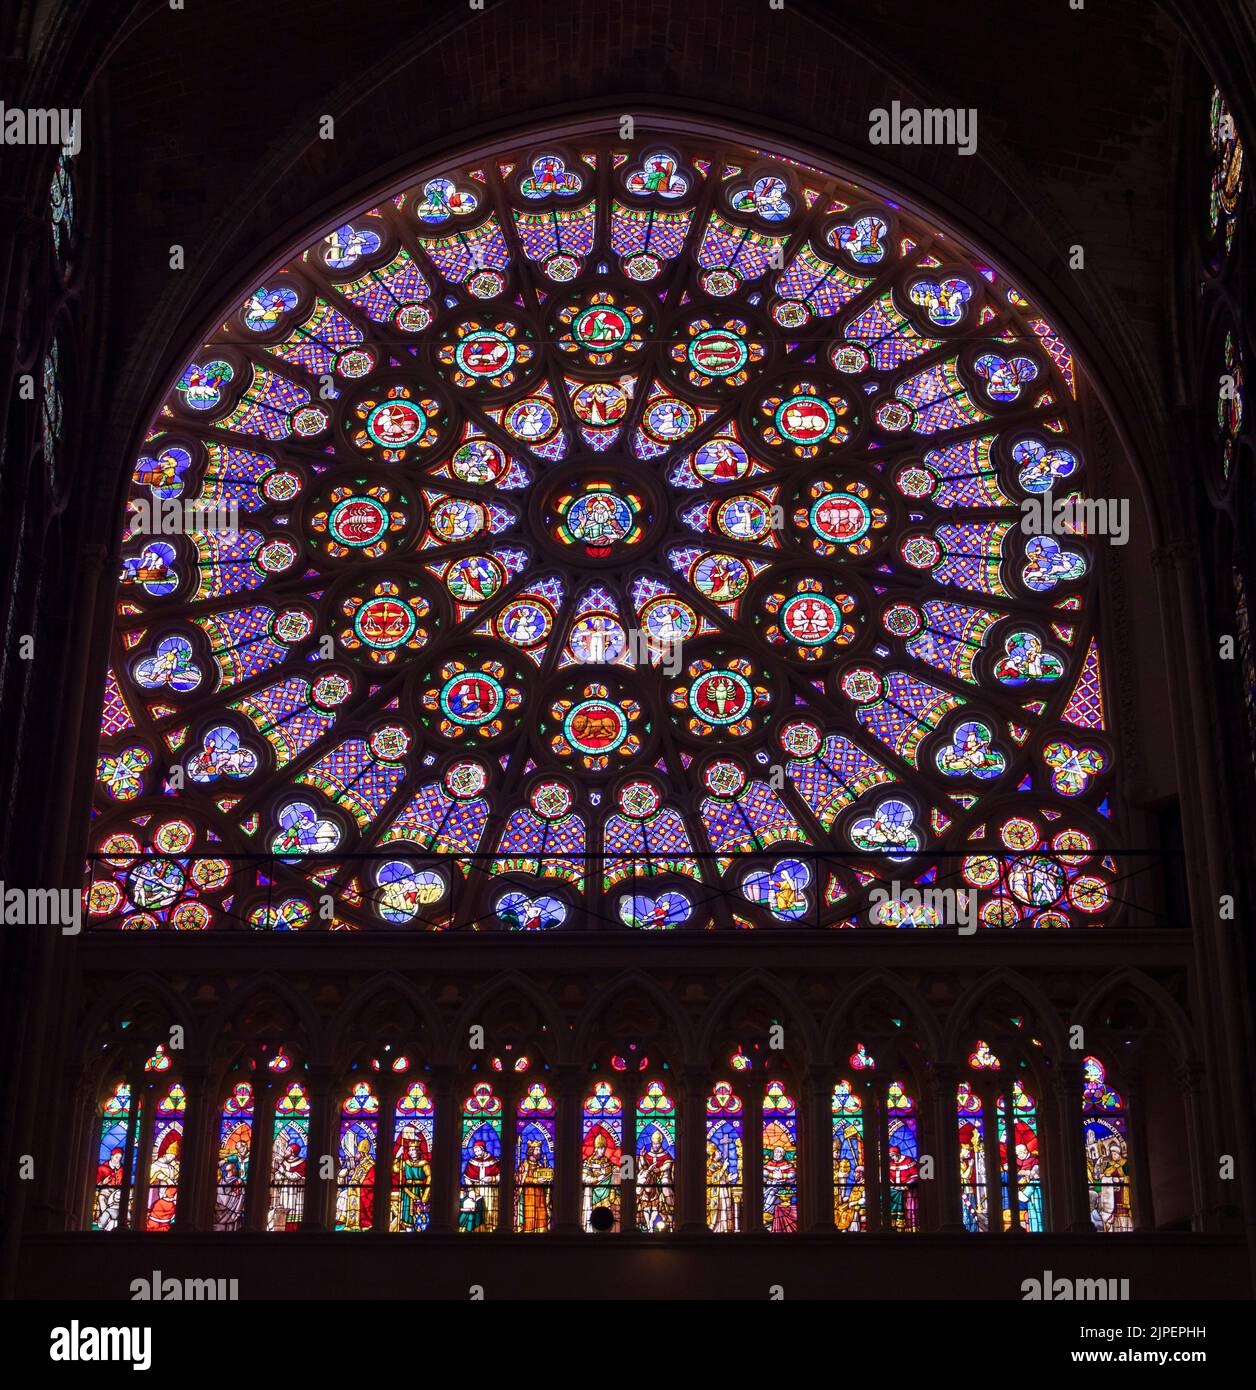 stained glass of rose window of south transept, 13th century, Saint-Denis basilica, Paris, France Stock Photo